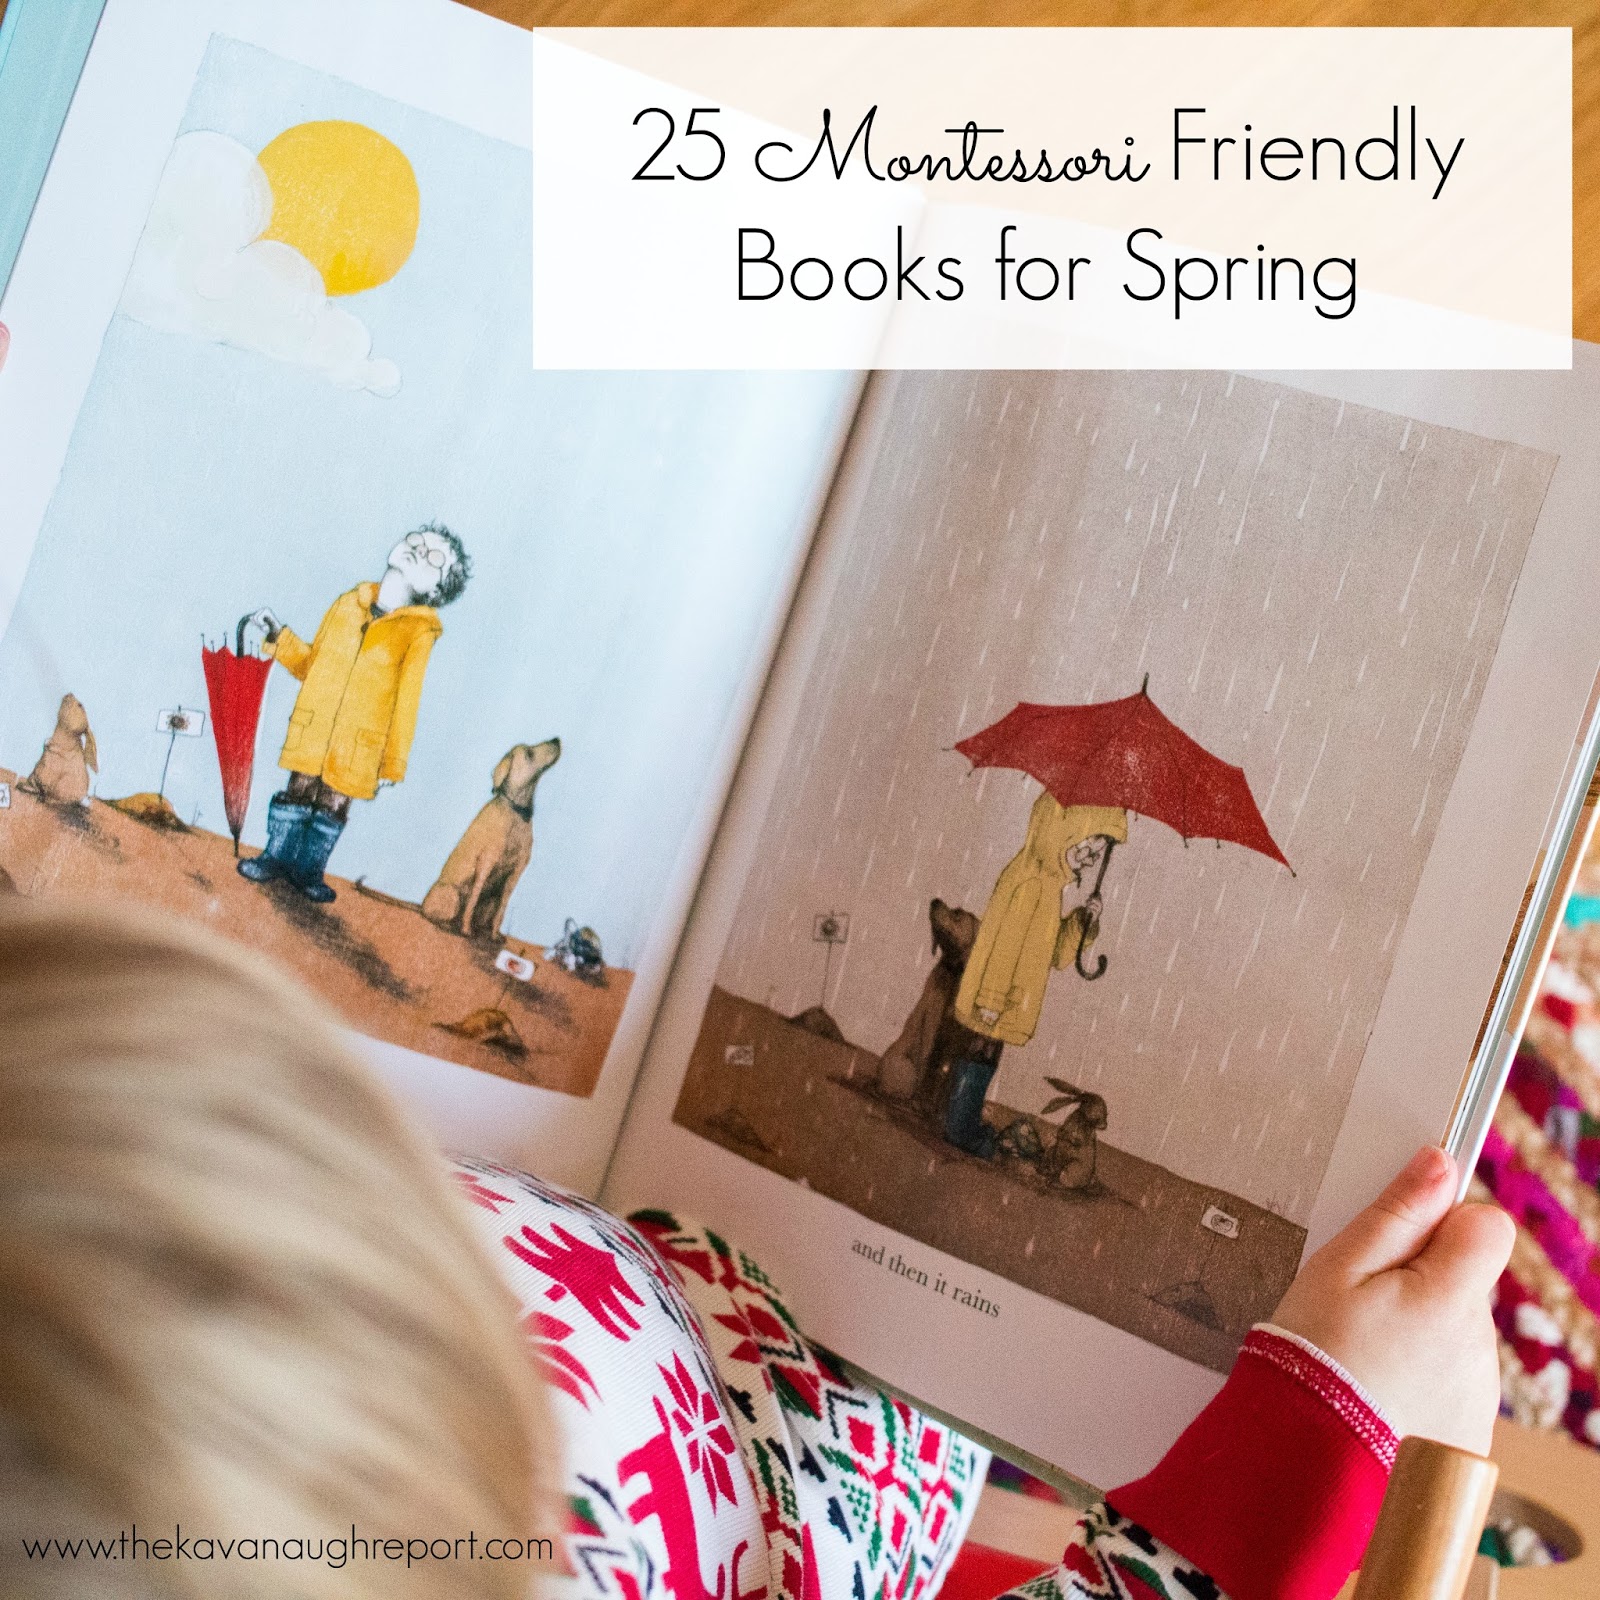 25 Montessori friendly children's books for spring. These books are great introductions to the spring season for young children. 